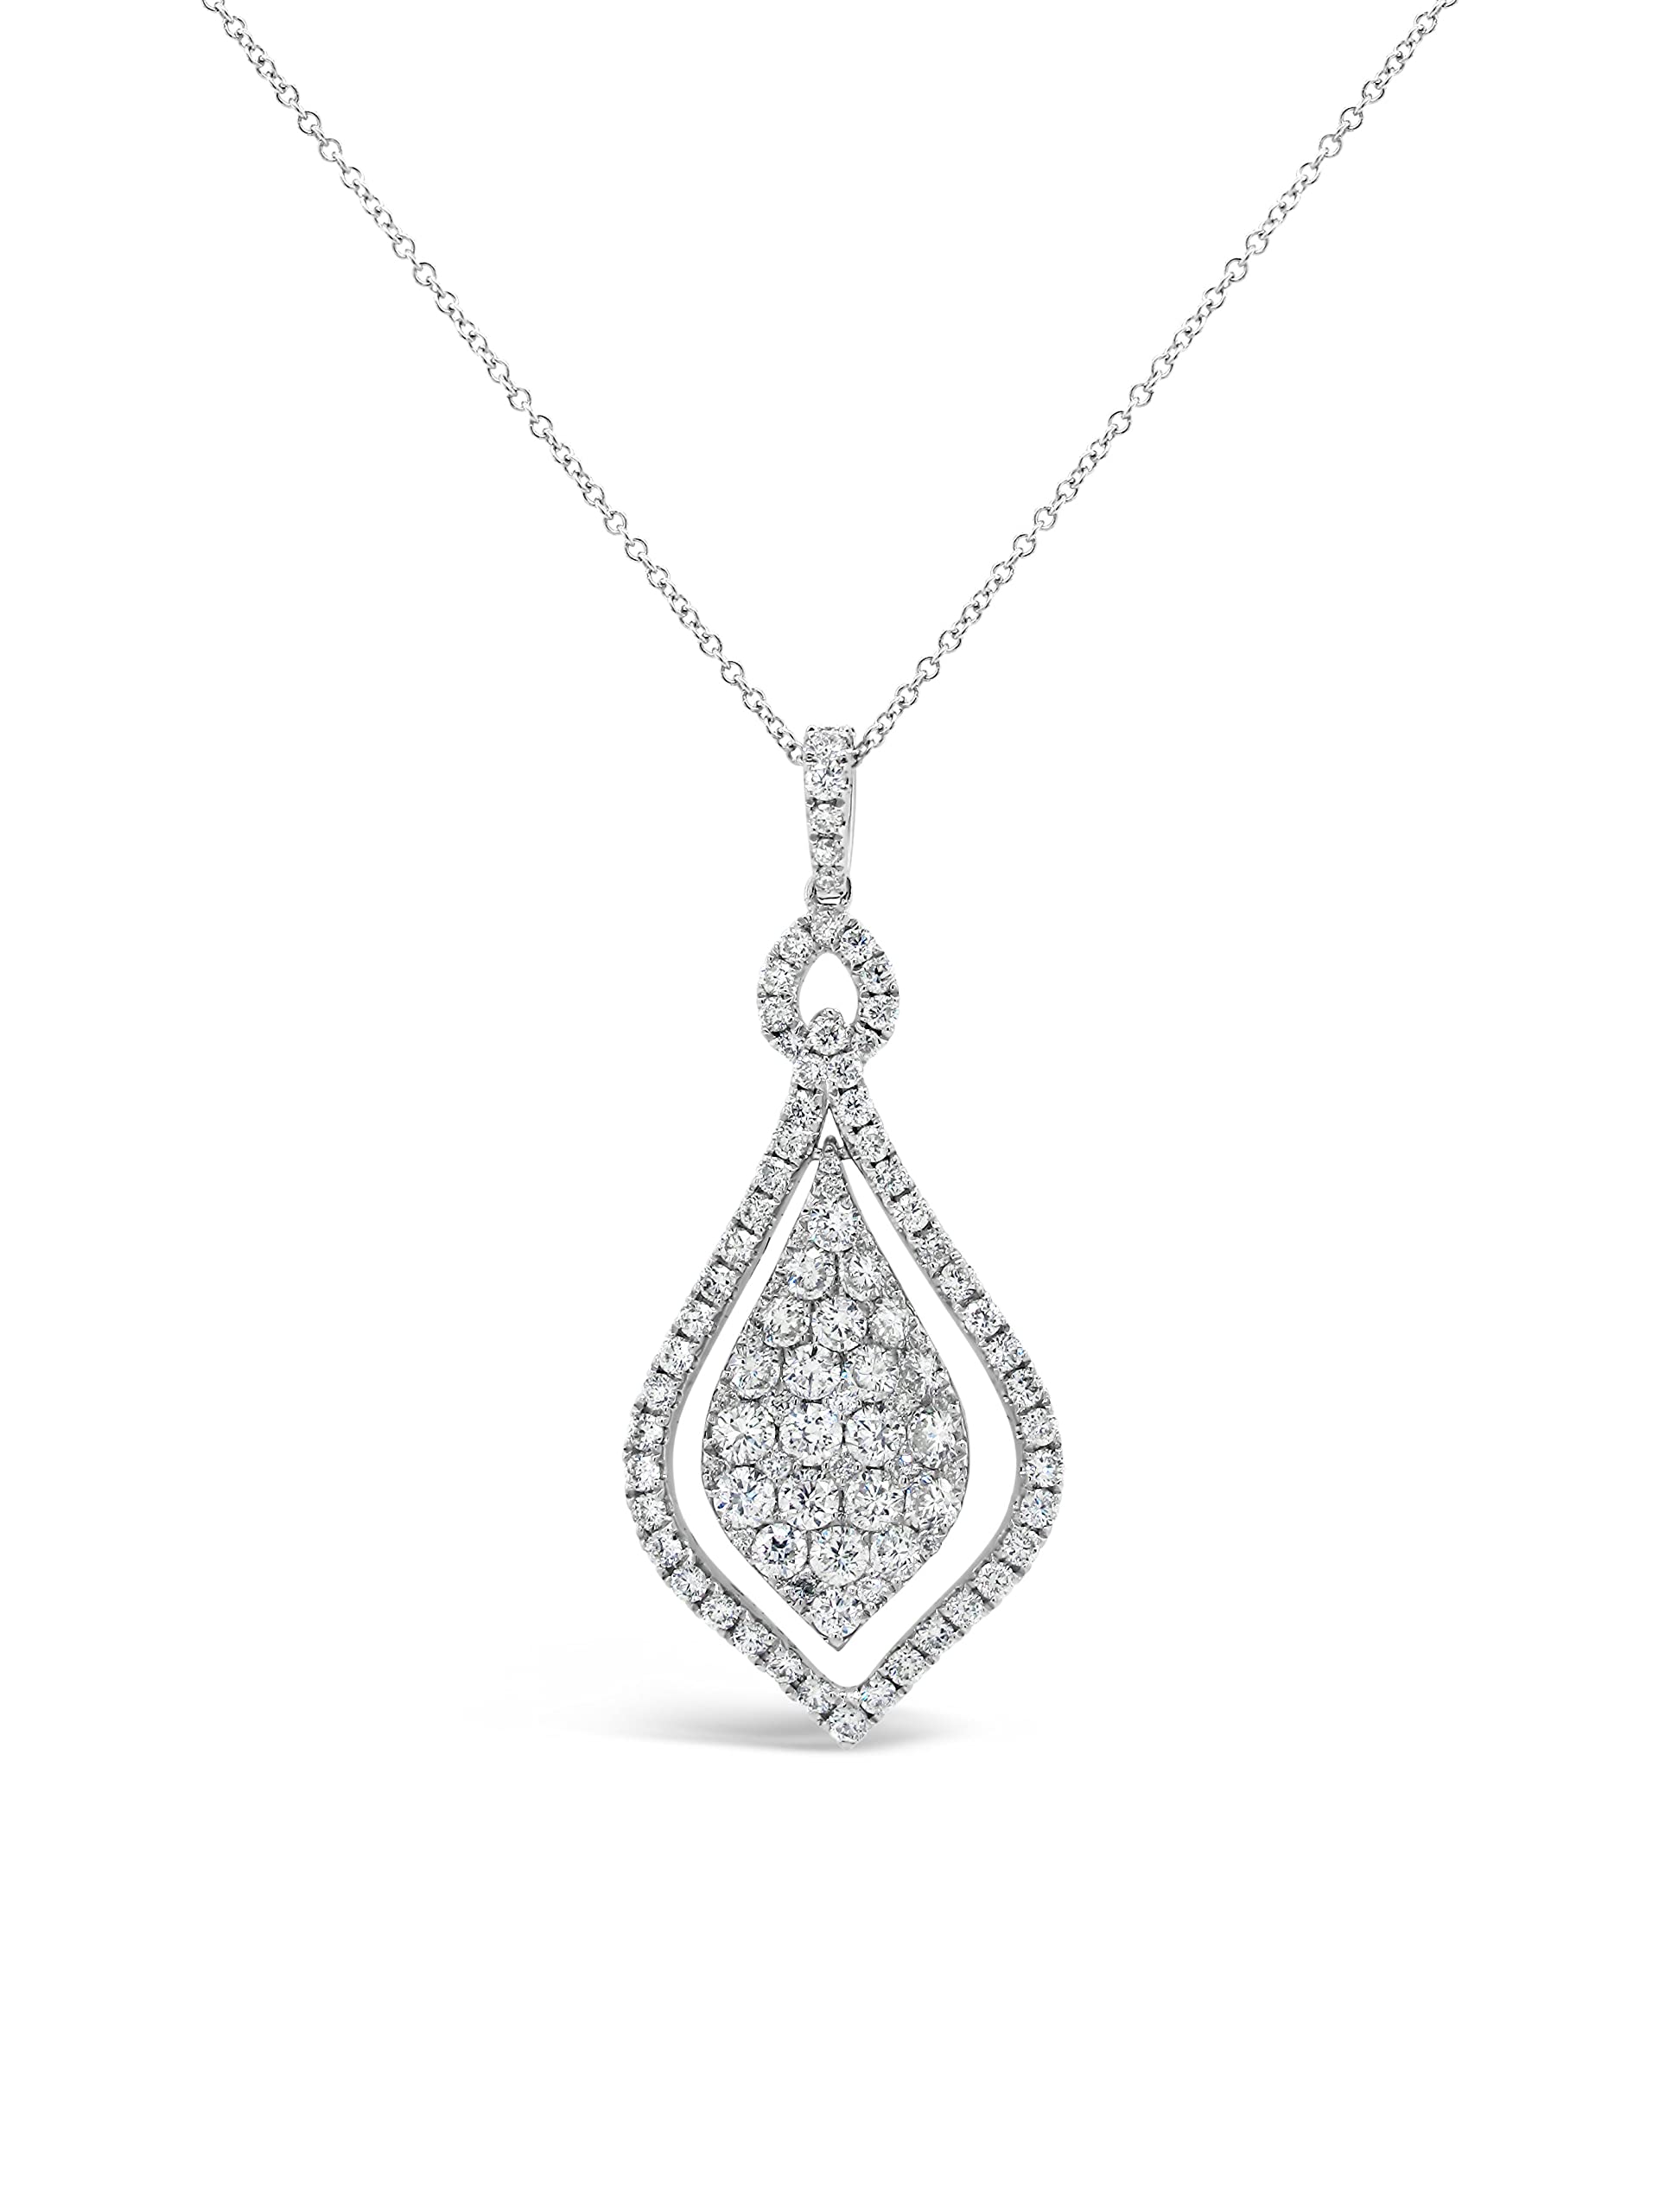 The Diamond Deal 18kt White Gold Womens Necklace Pear-shaped Teardrop VS Diamond Pendant 1.68 Cttw (16 in, 2 in ext.)